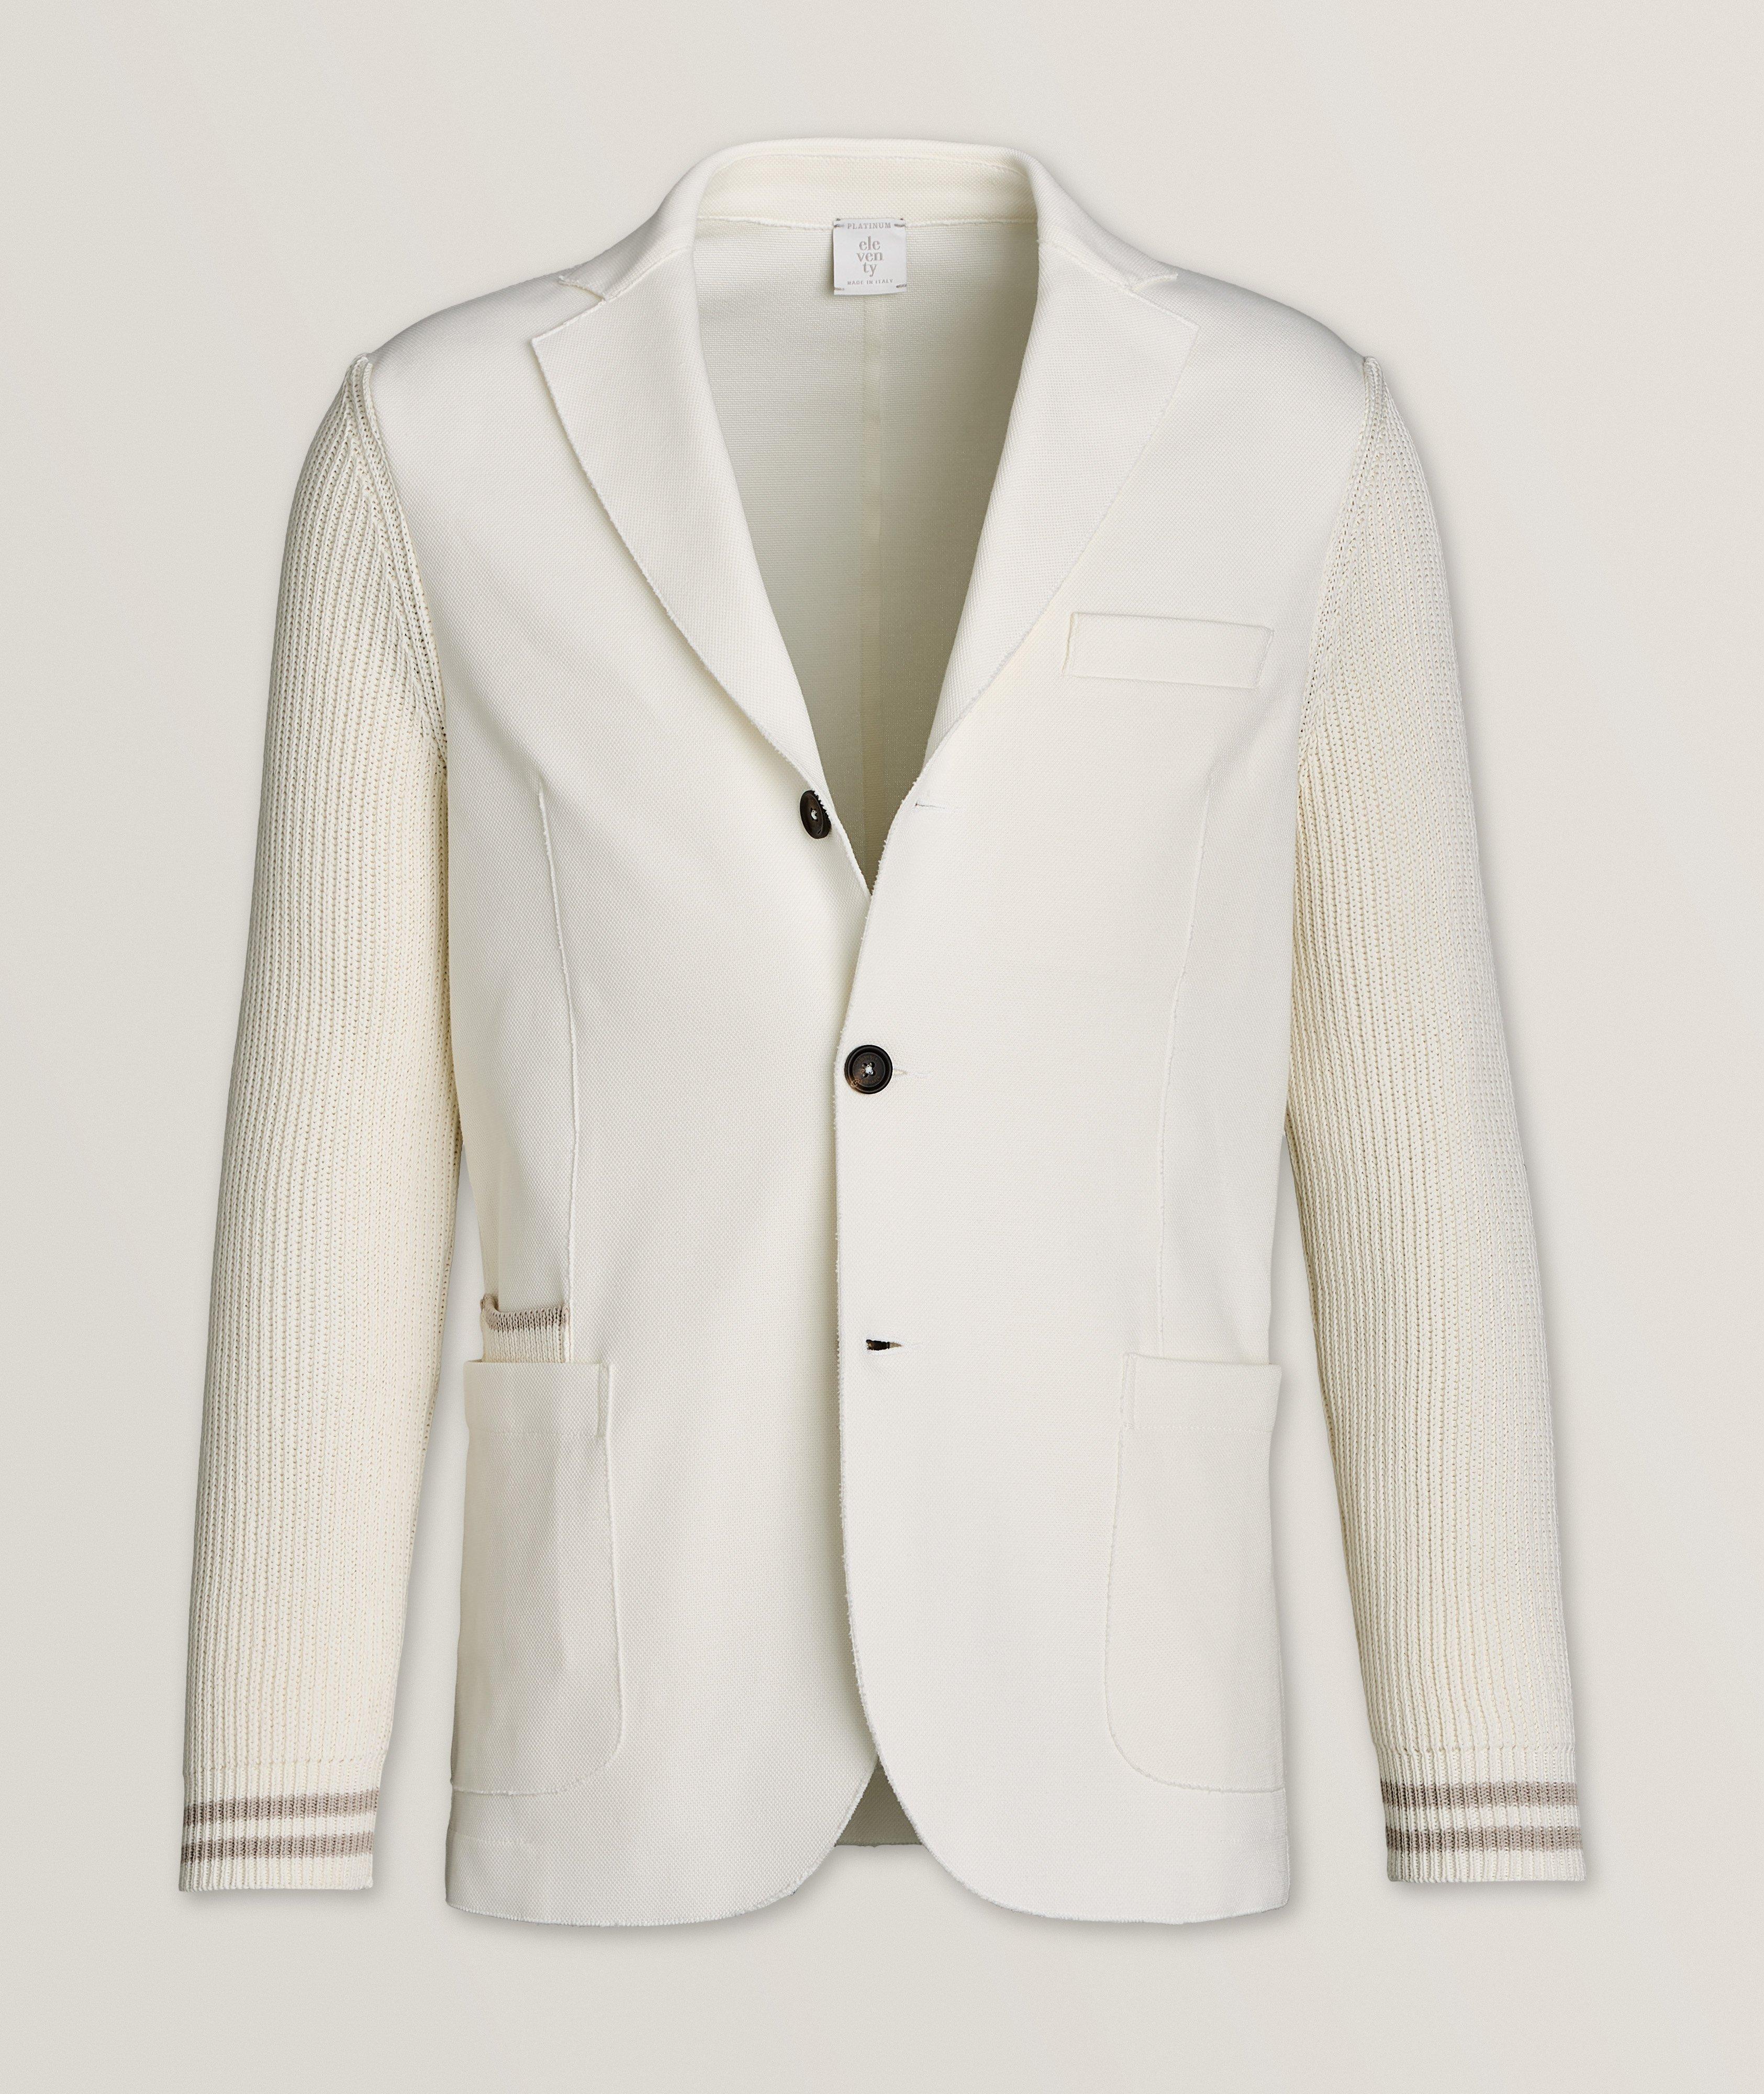 Platinum Collection Mixed Material Sport Jacket image 0